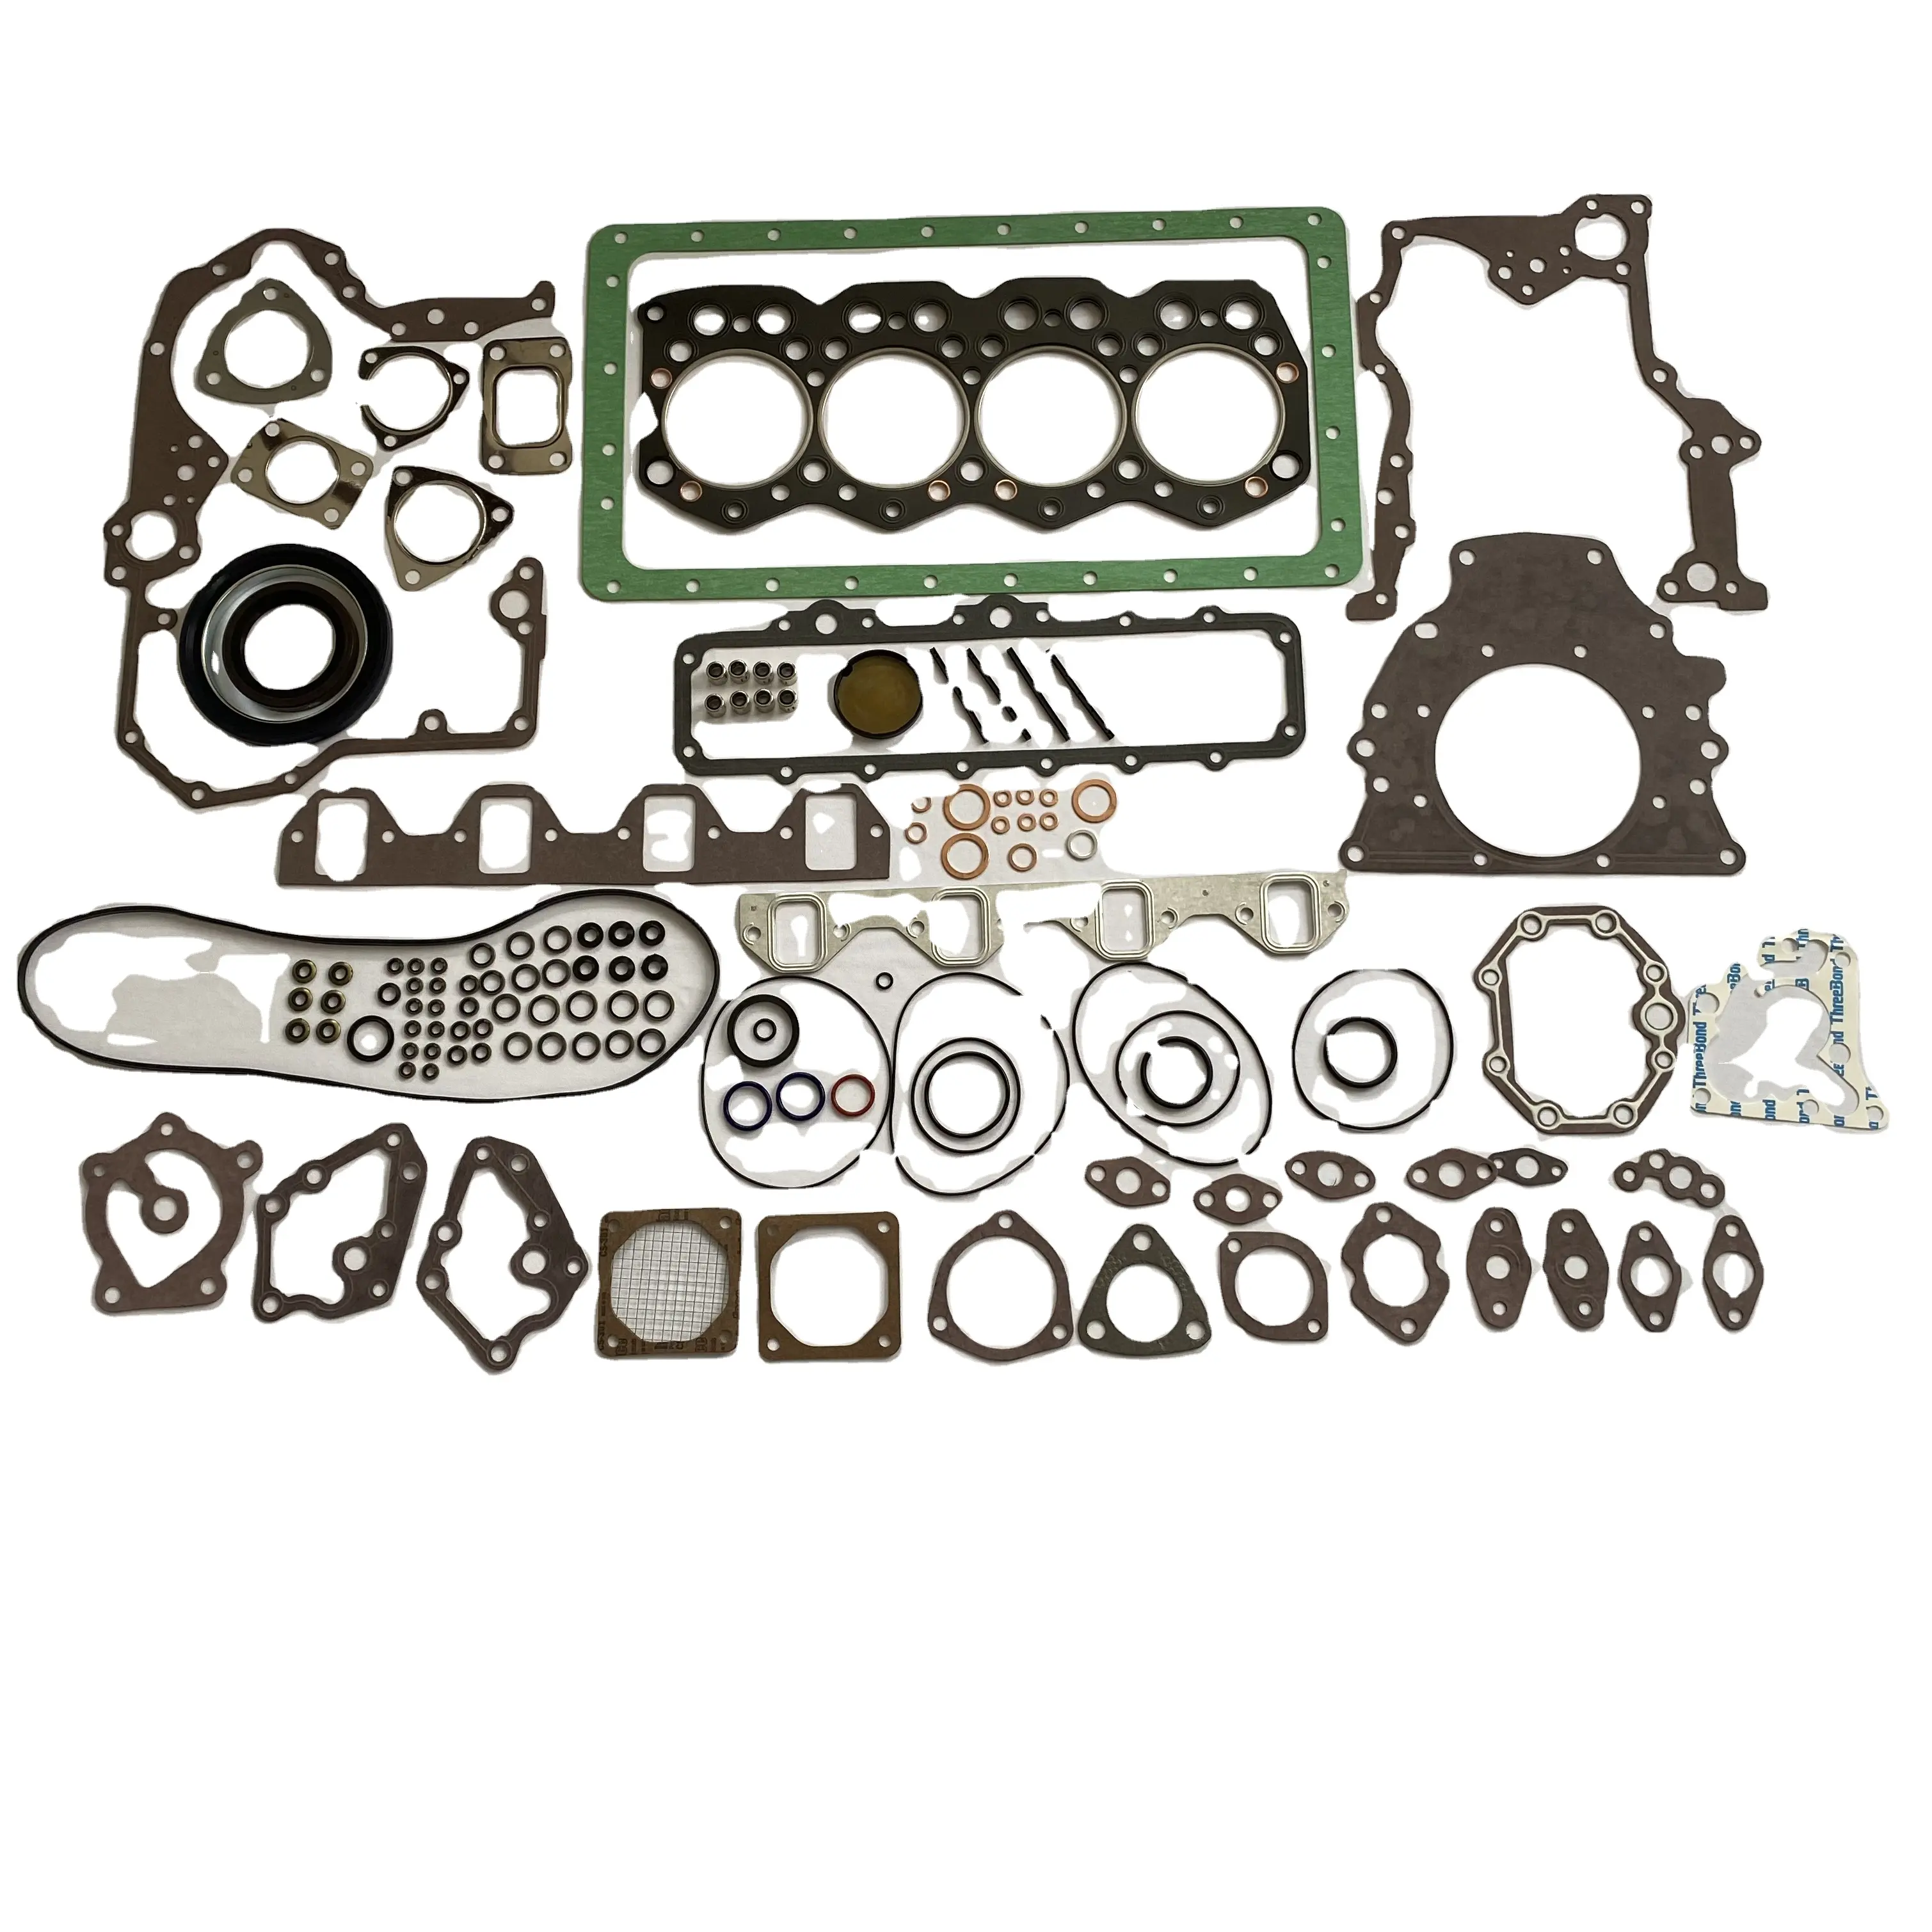 High Quality Construction Machinery Engine Parts S4K Overhaul Diesel Engine Parts Full Gasket Kit 34294-00011 Overall Repair